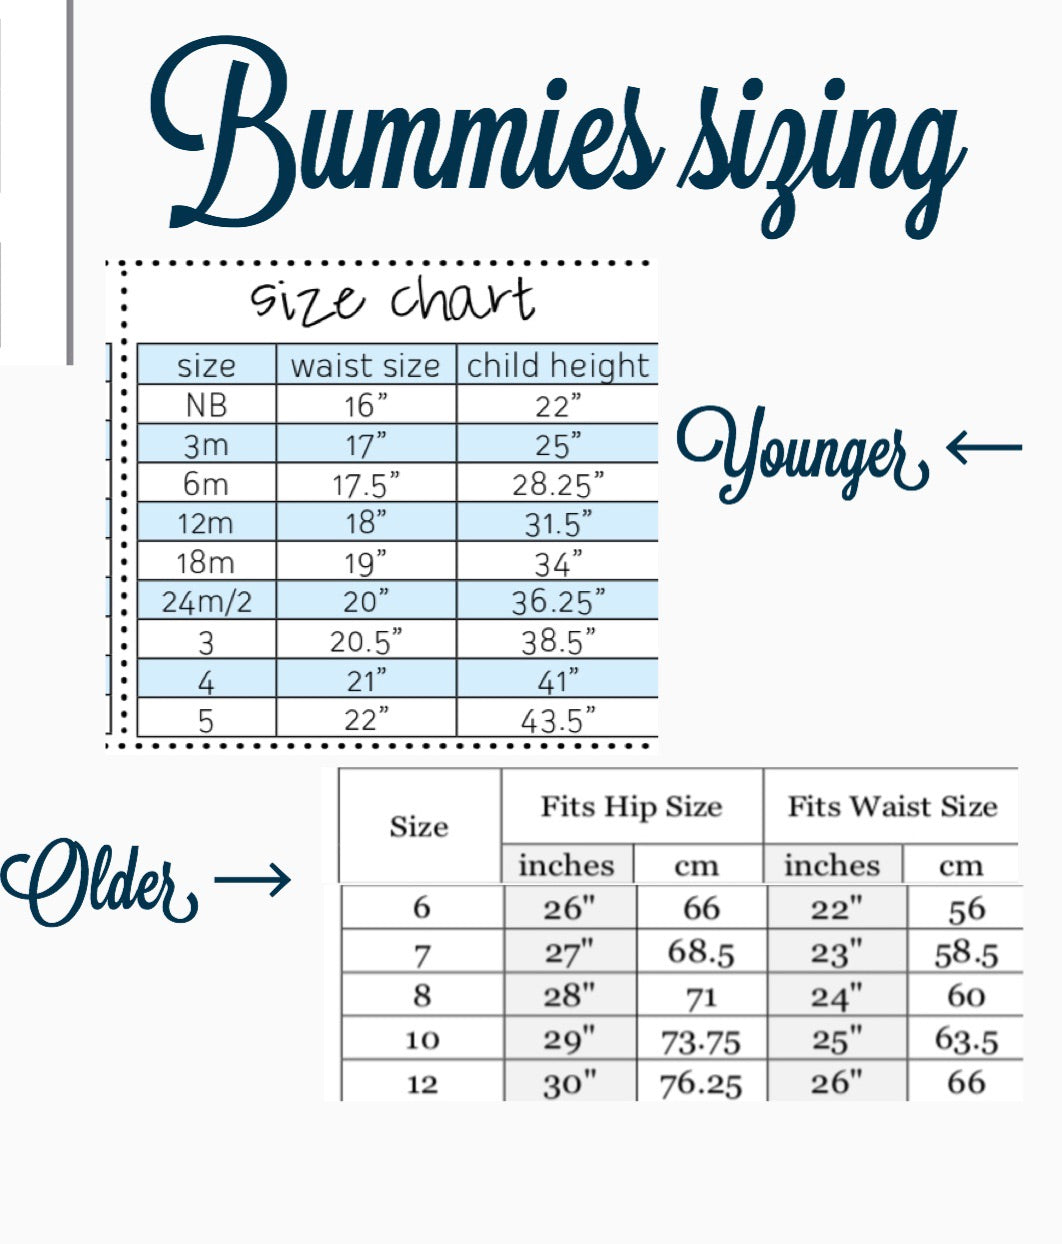 Design your own| Skirted Bummies